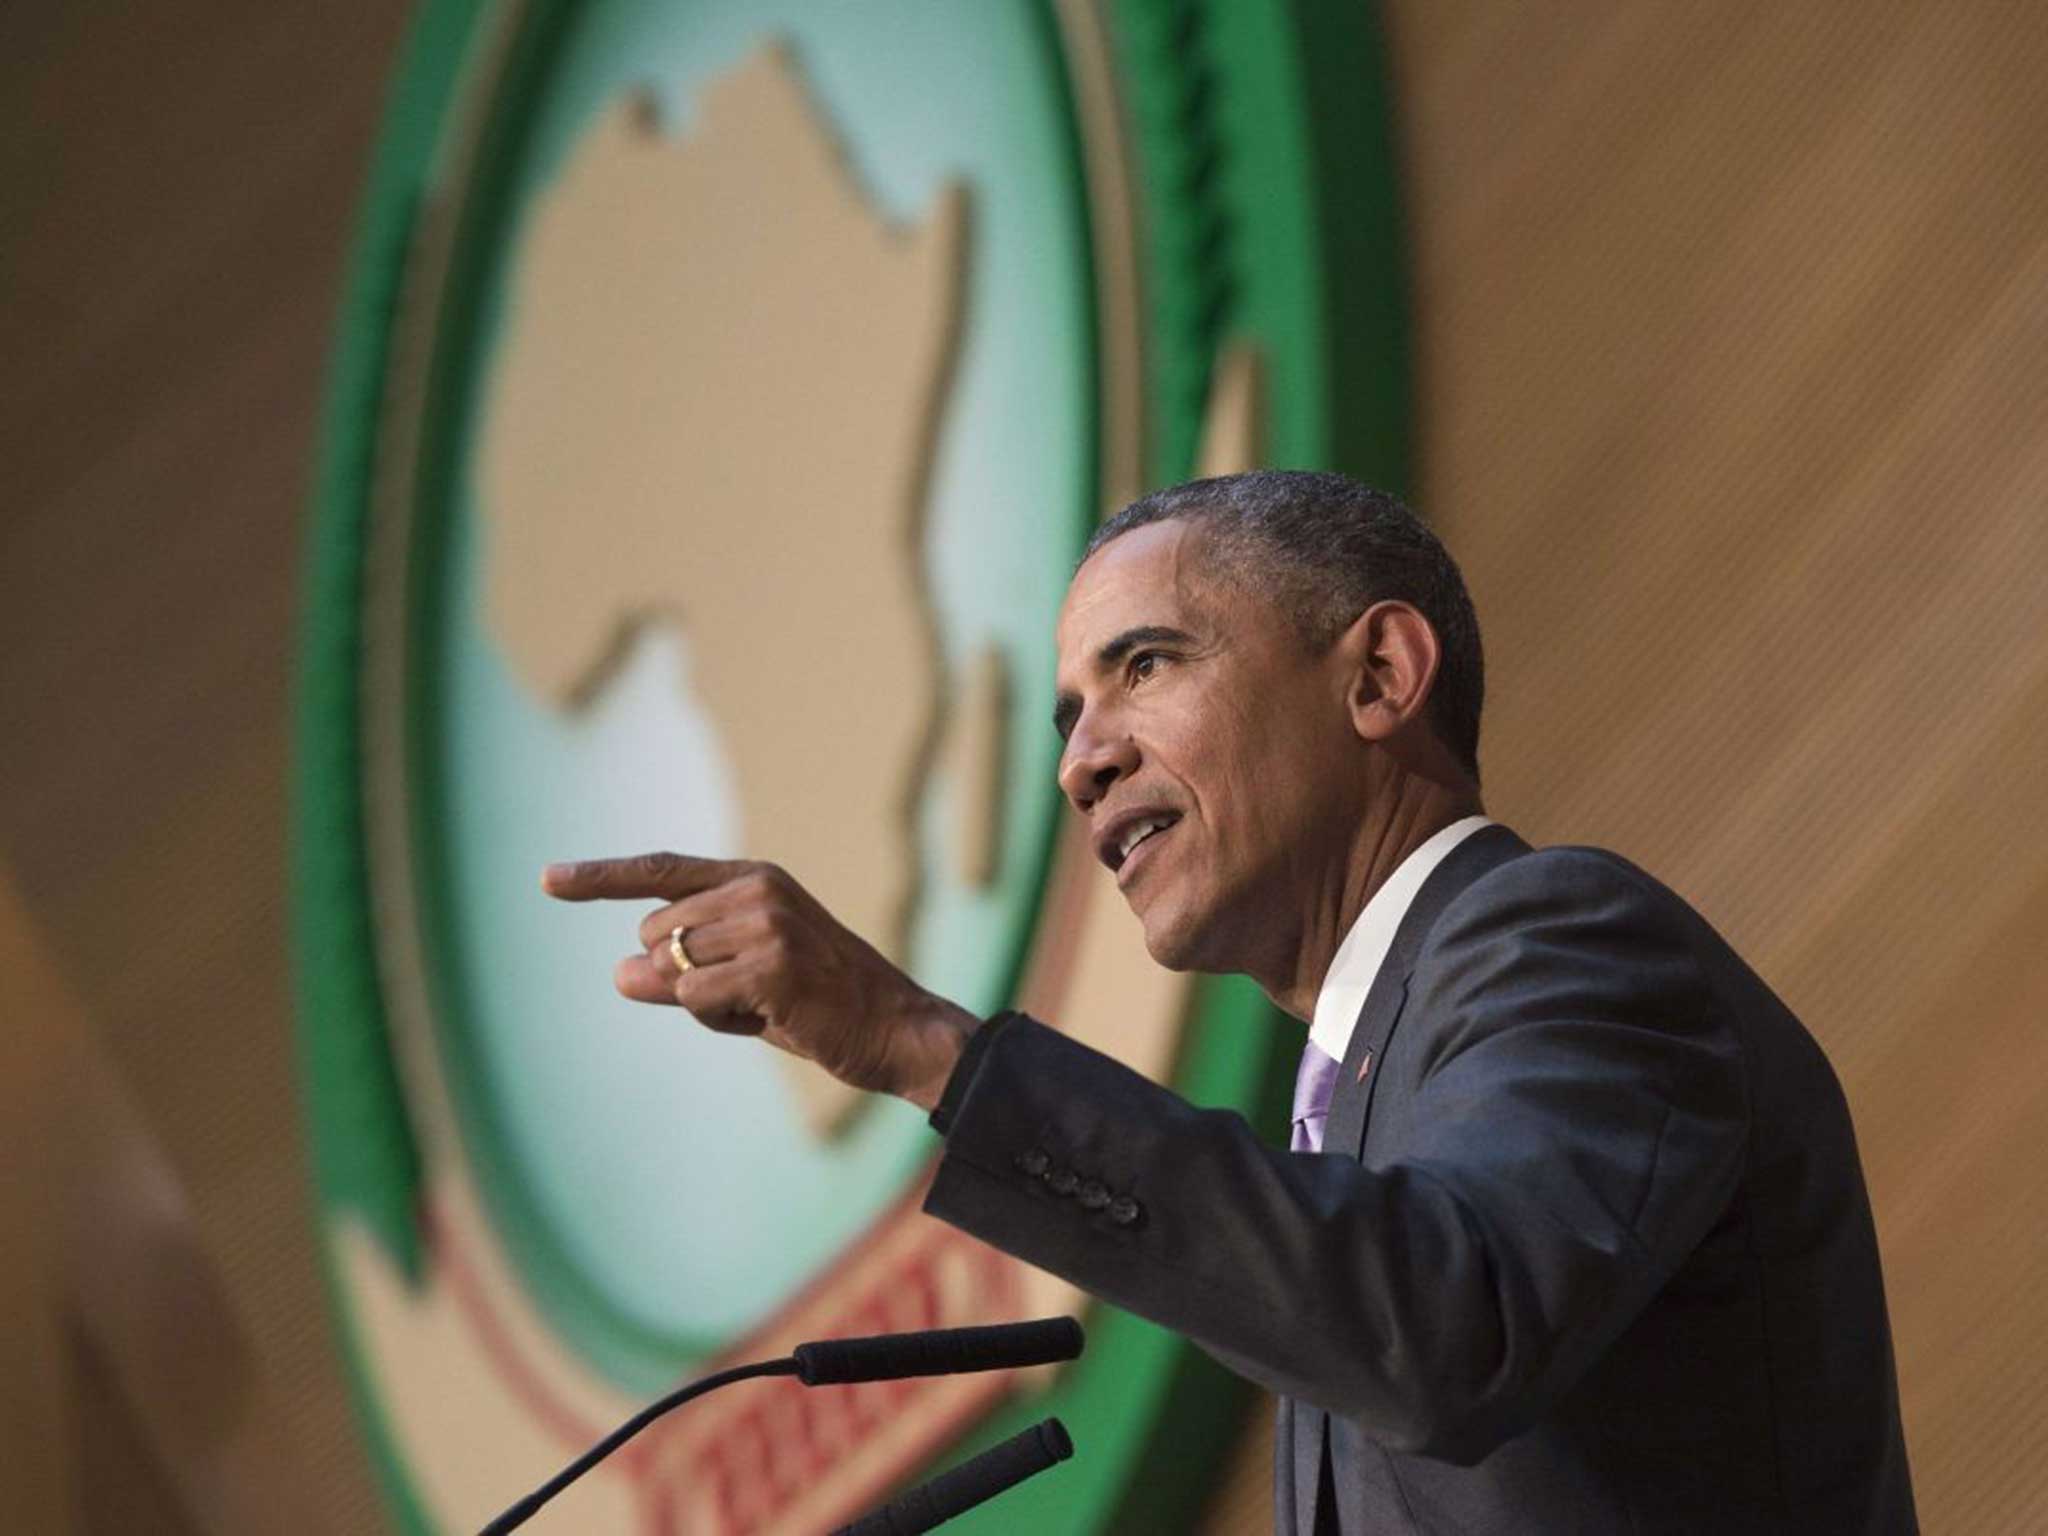 President Obama addresses the African Union